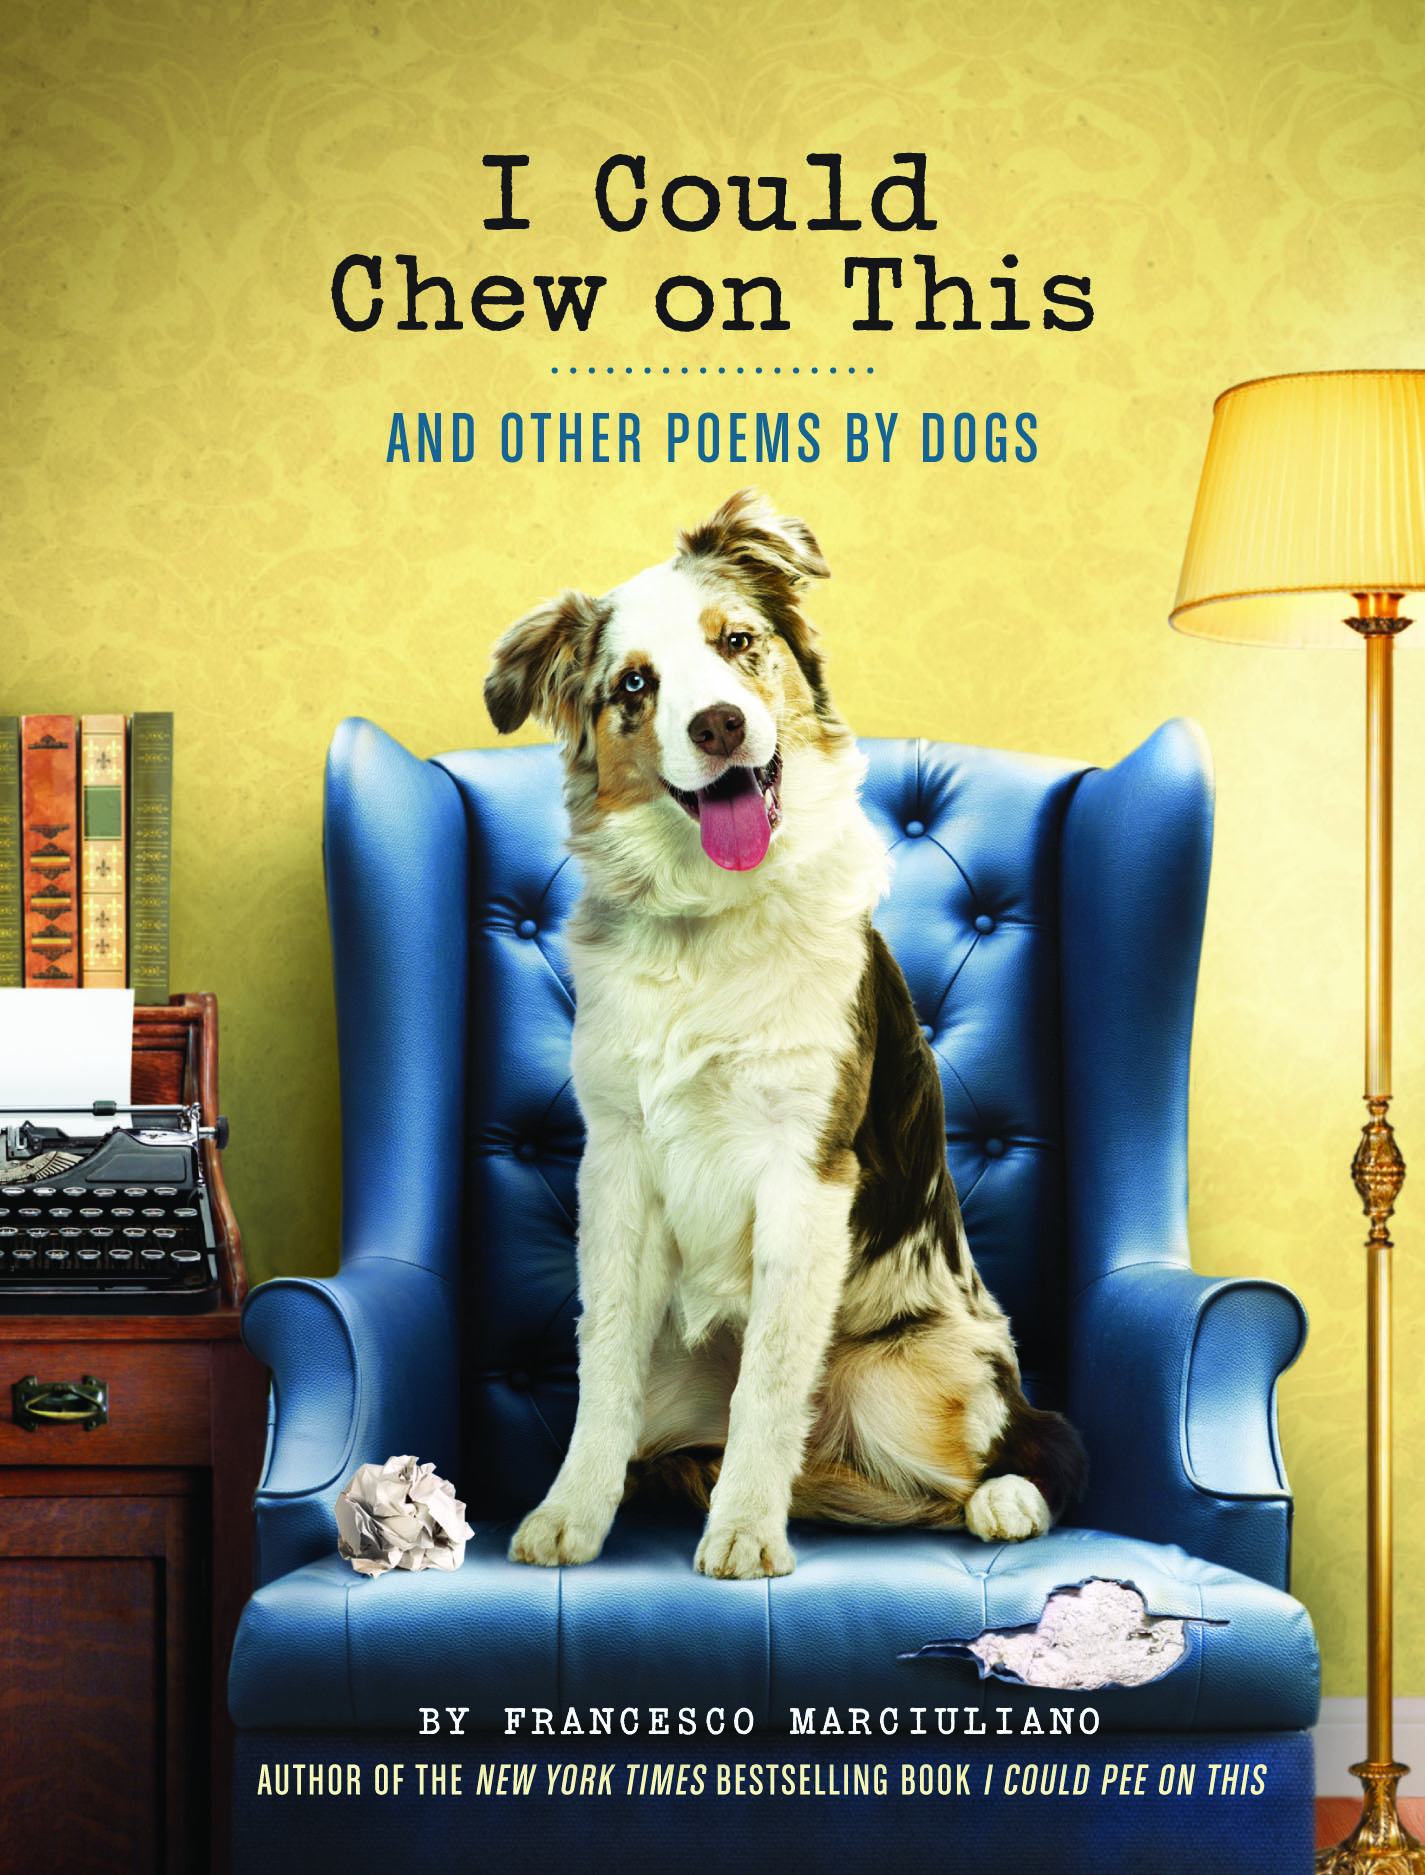 Book Launch: I Could Chew on This by Francesco Marciuliano